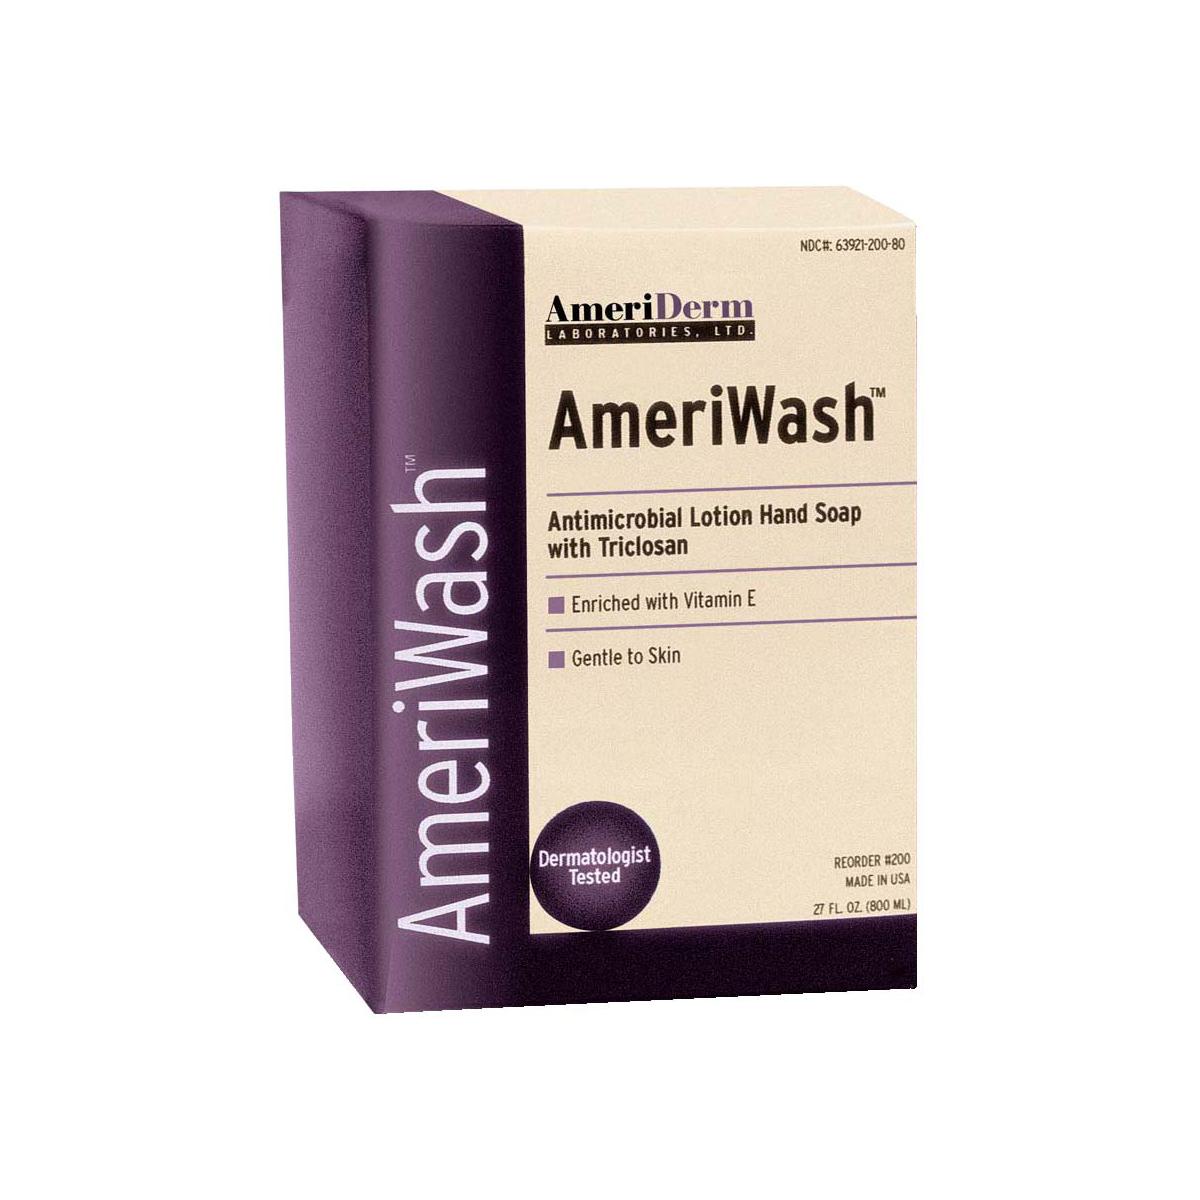 EA/1 - Ameriderm AmeriWash&trade; Anti-Microbial Lotion Soap with Triclosan, Vitamin E Enriched, 800mL - Best Buy Medical Supplies